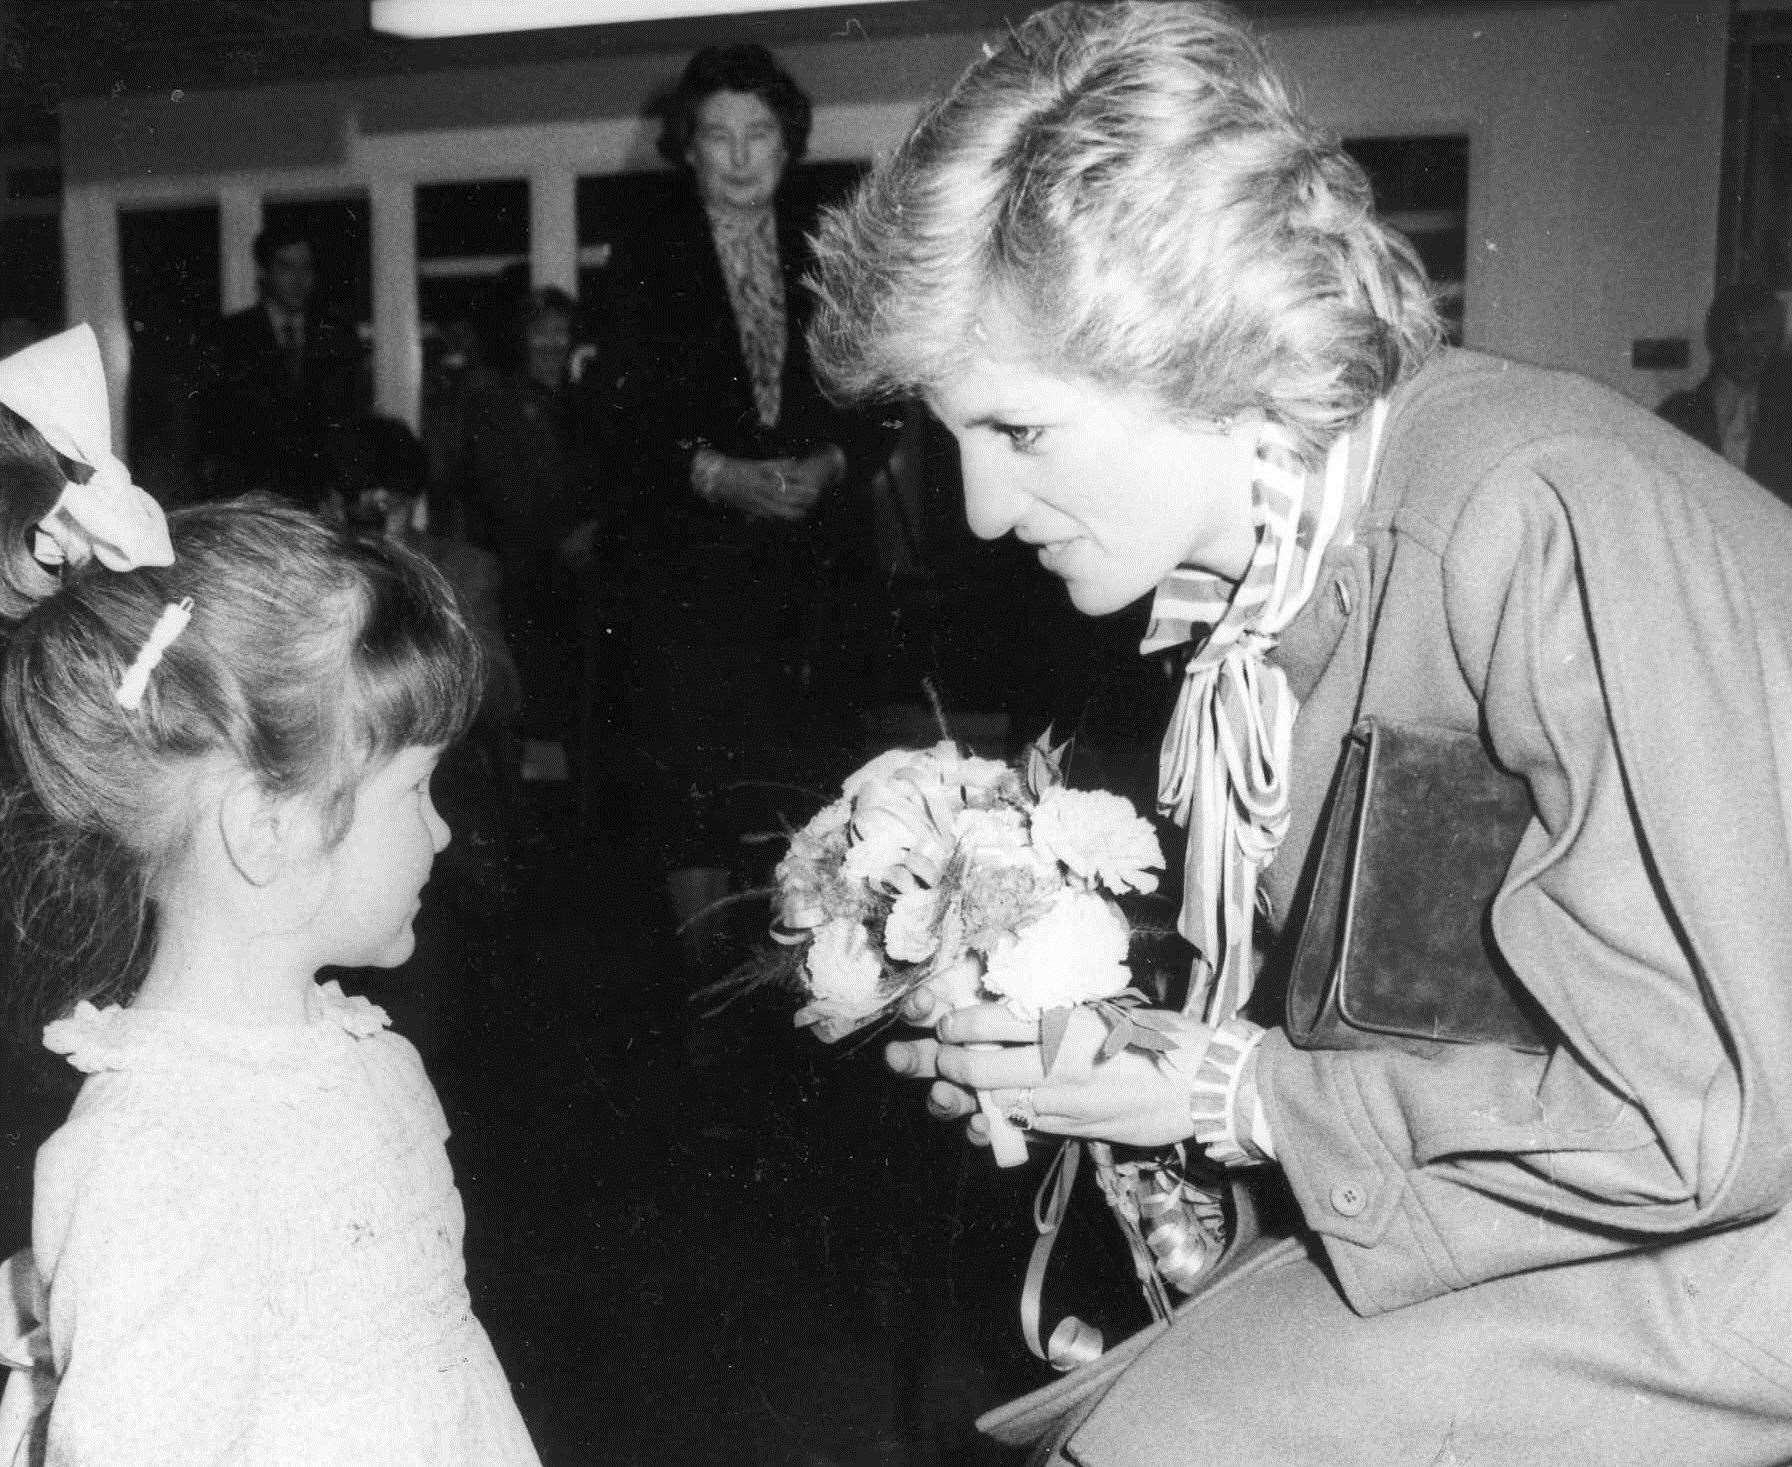 Rachel Malic came face to face with the Princess of Wales at the William Harvey Hospital, Ashford, in December 1985. The Princess, as patron of the national Rubella Council, met women who had been vaccinated against German measles